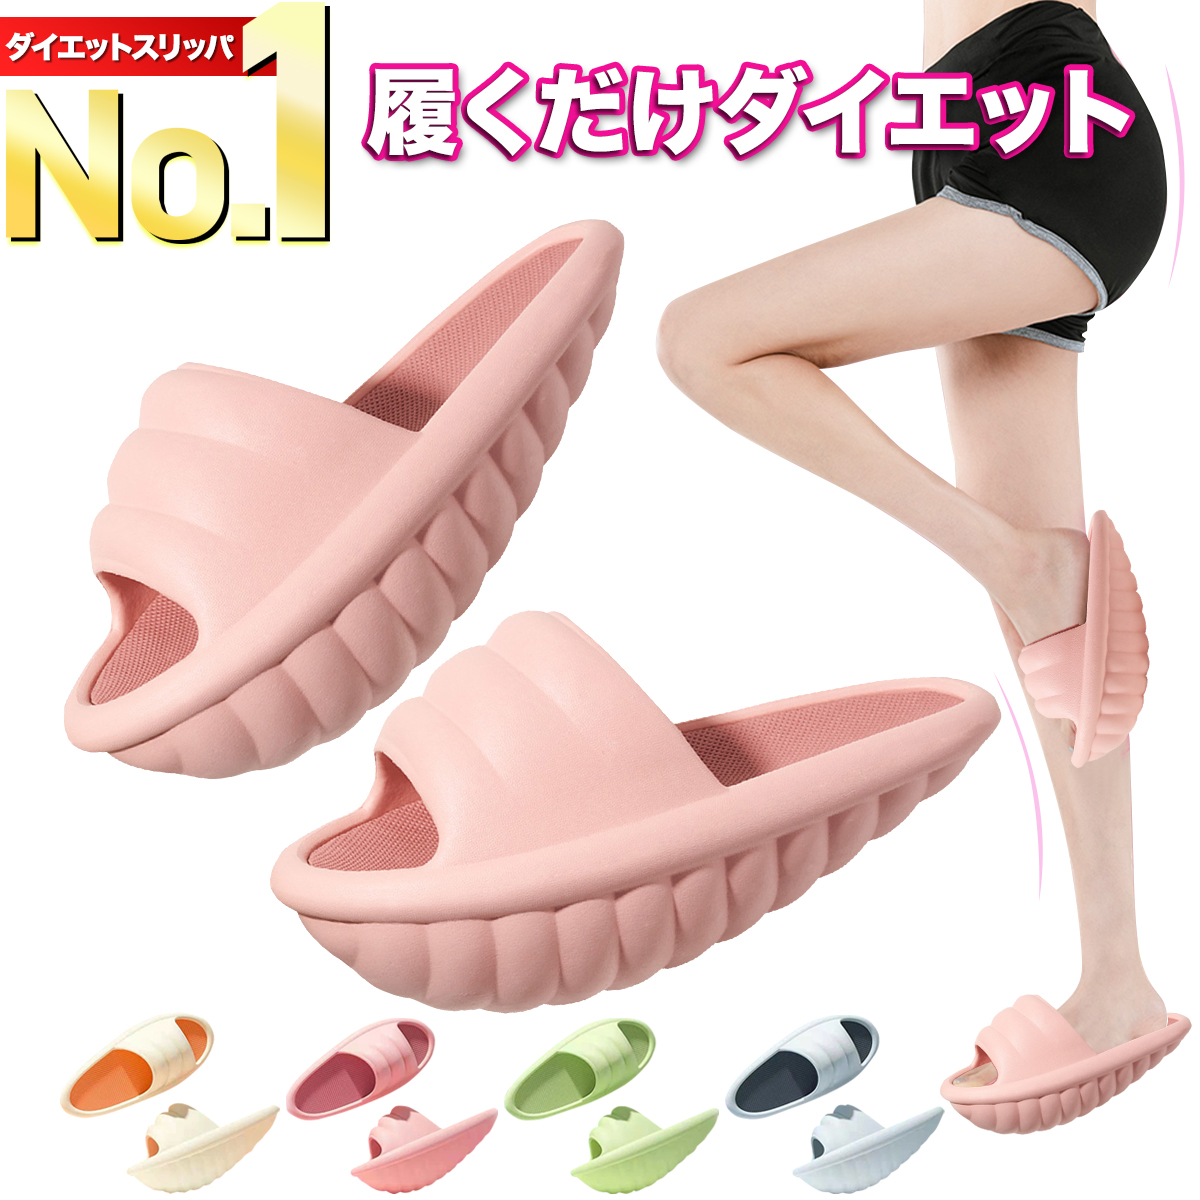  diet slippers effect slippers sandals shoes balance body .O legs lady's men's interior motion stretch diet health pink black 